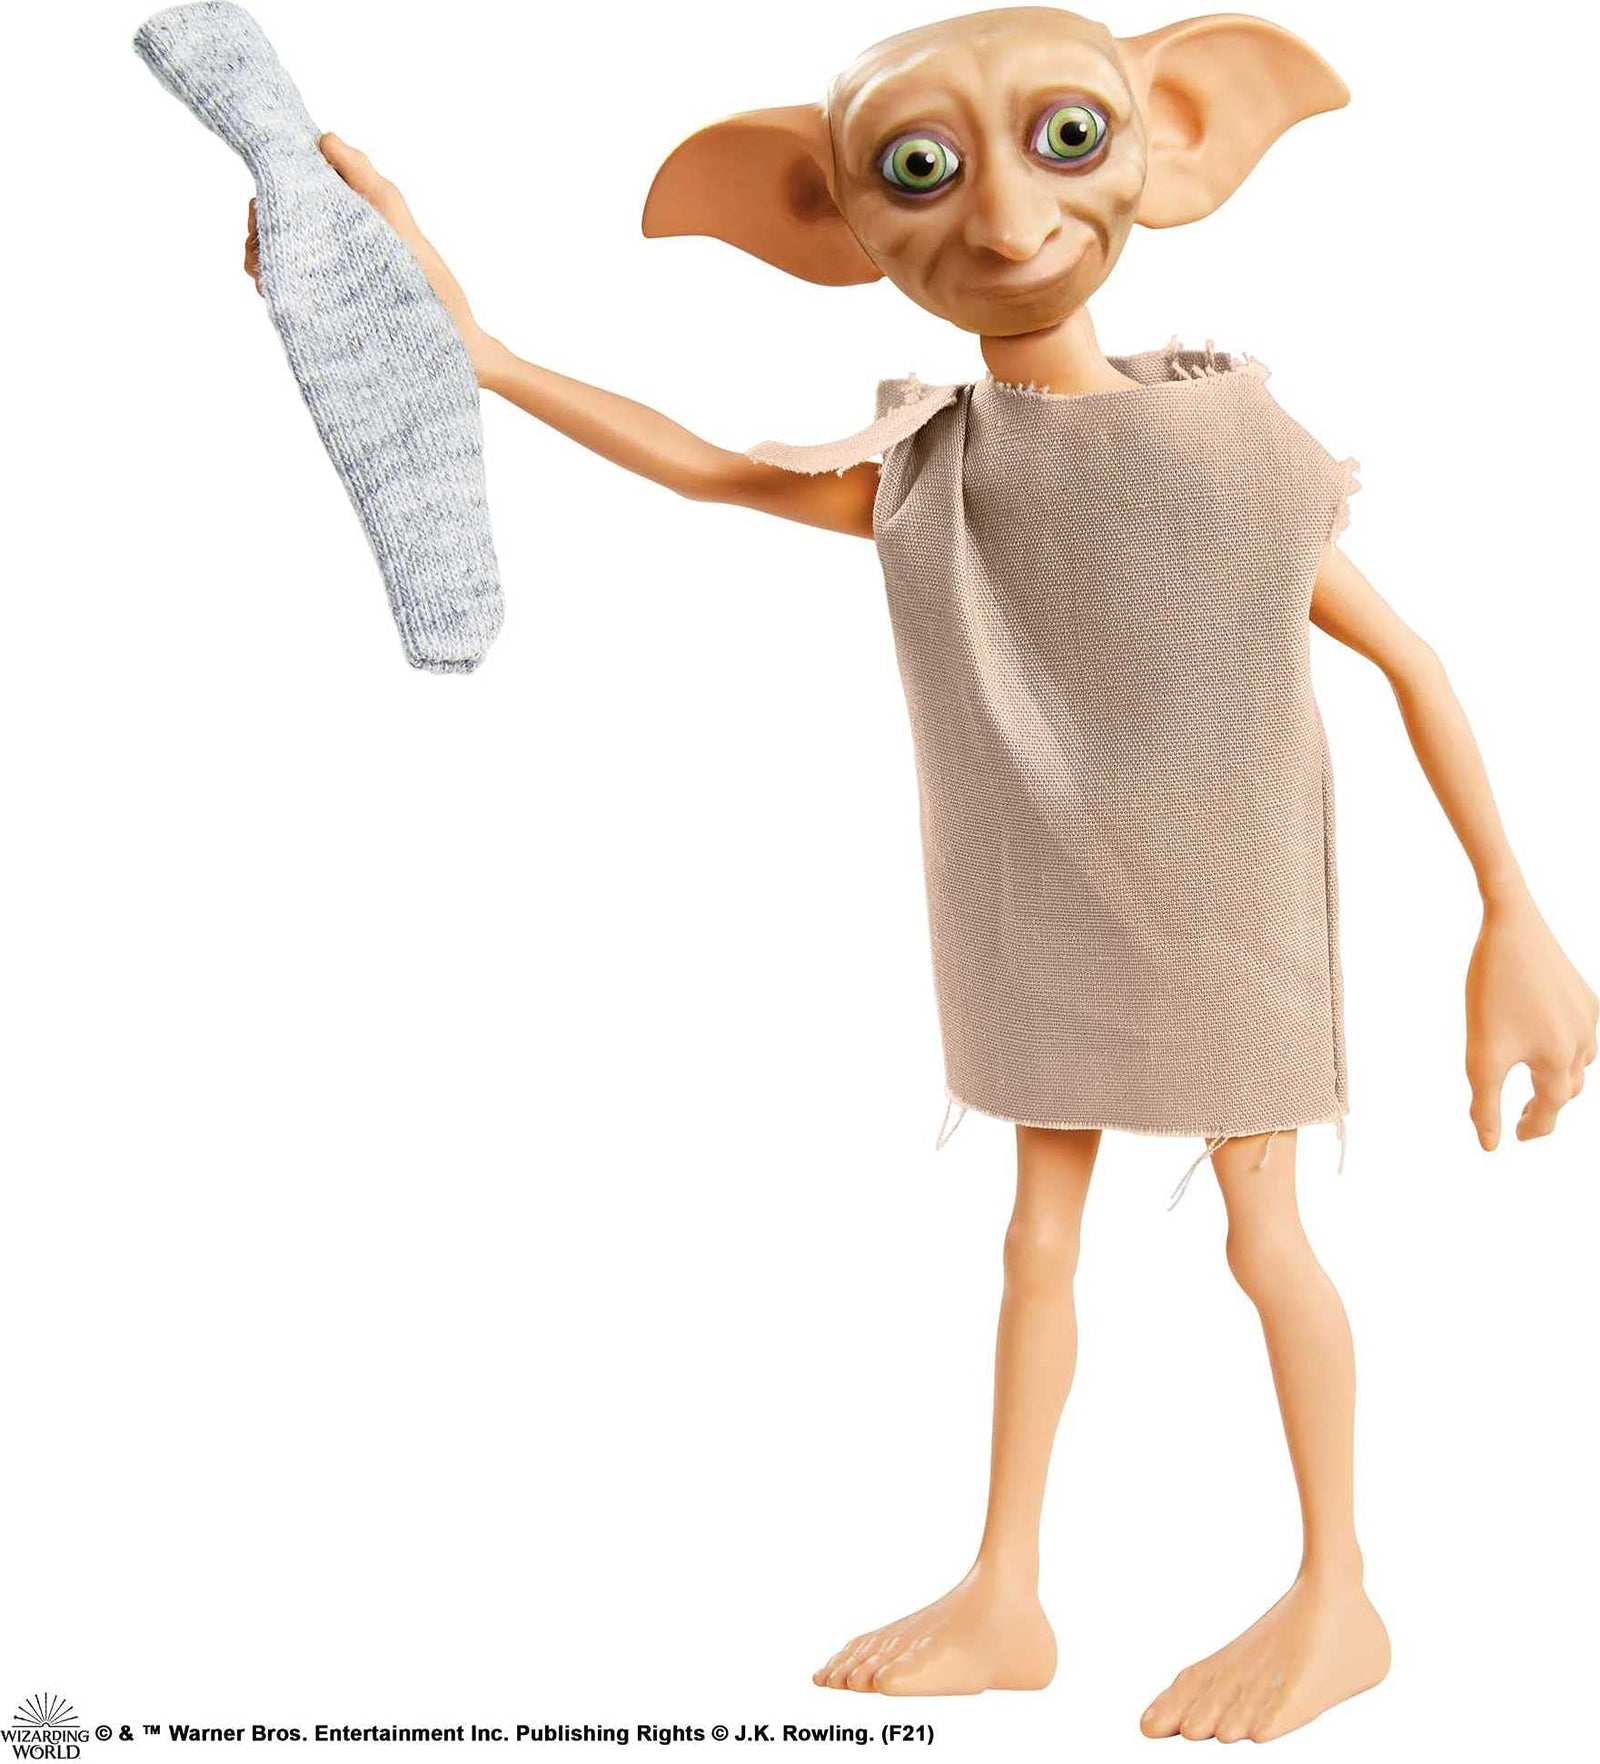 Harry Potter Collectible Dobby The House Elf Doll (5-inch), Wearing Fabric Tunic, with Sock Accessory, Gift for Collectors and Kids 6 Years Old and Up